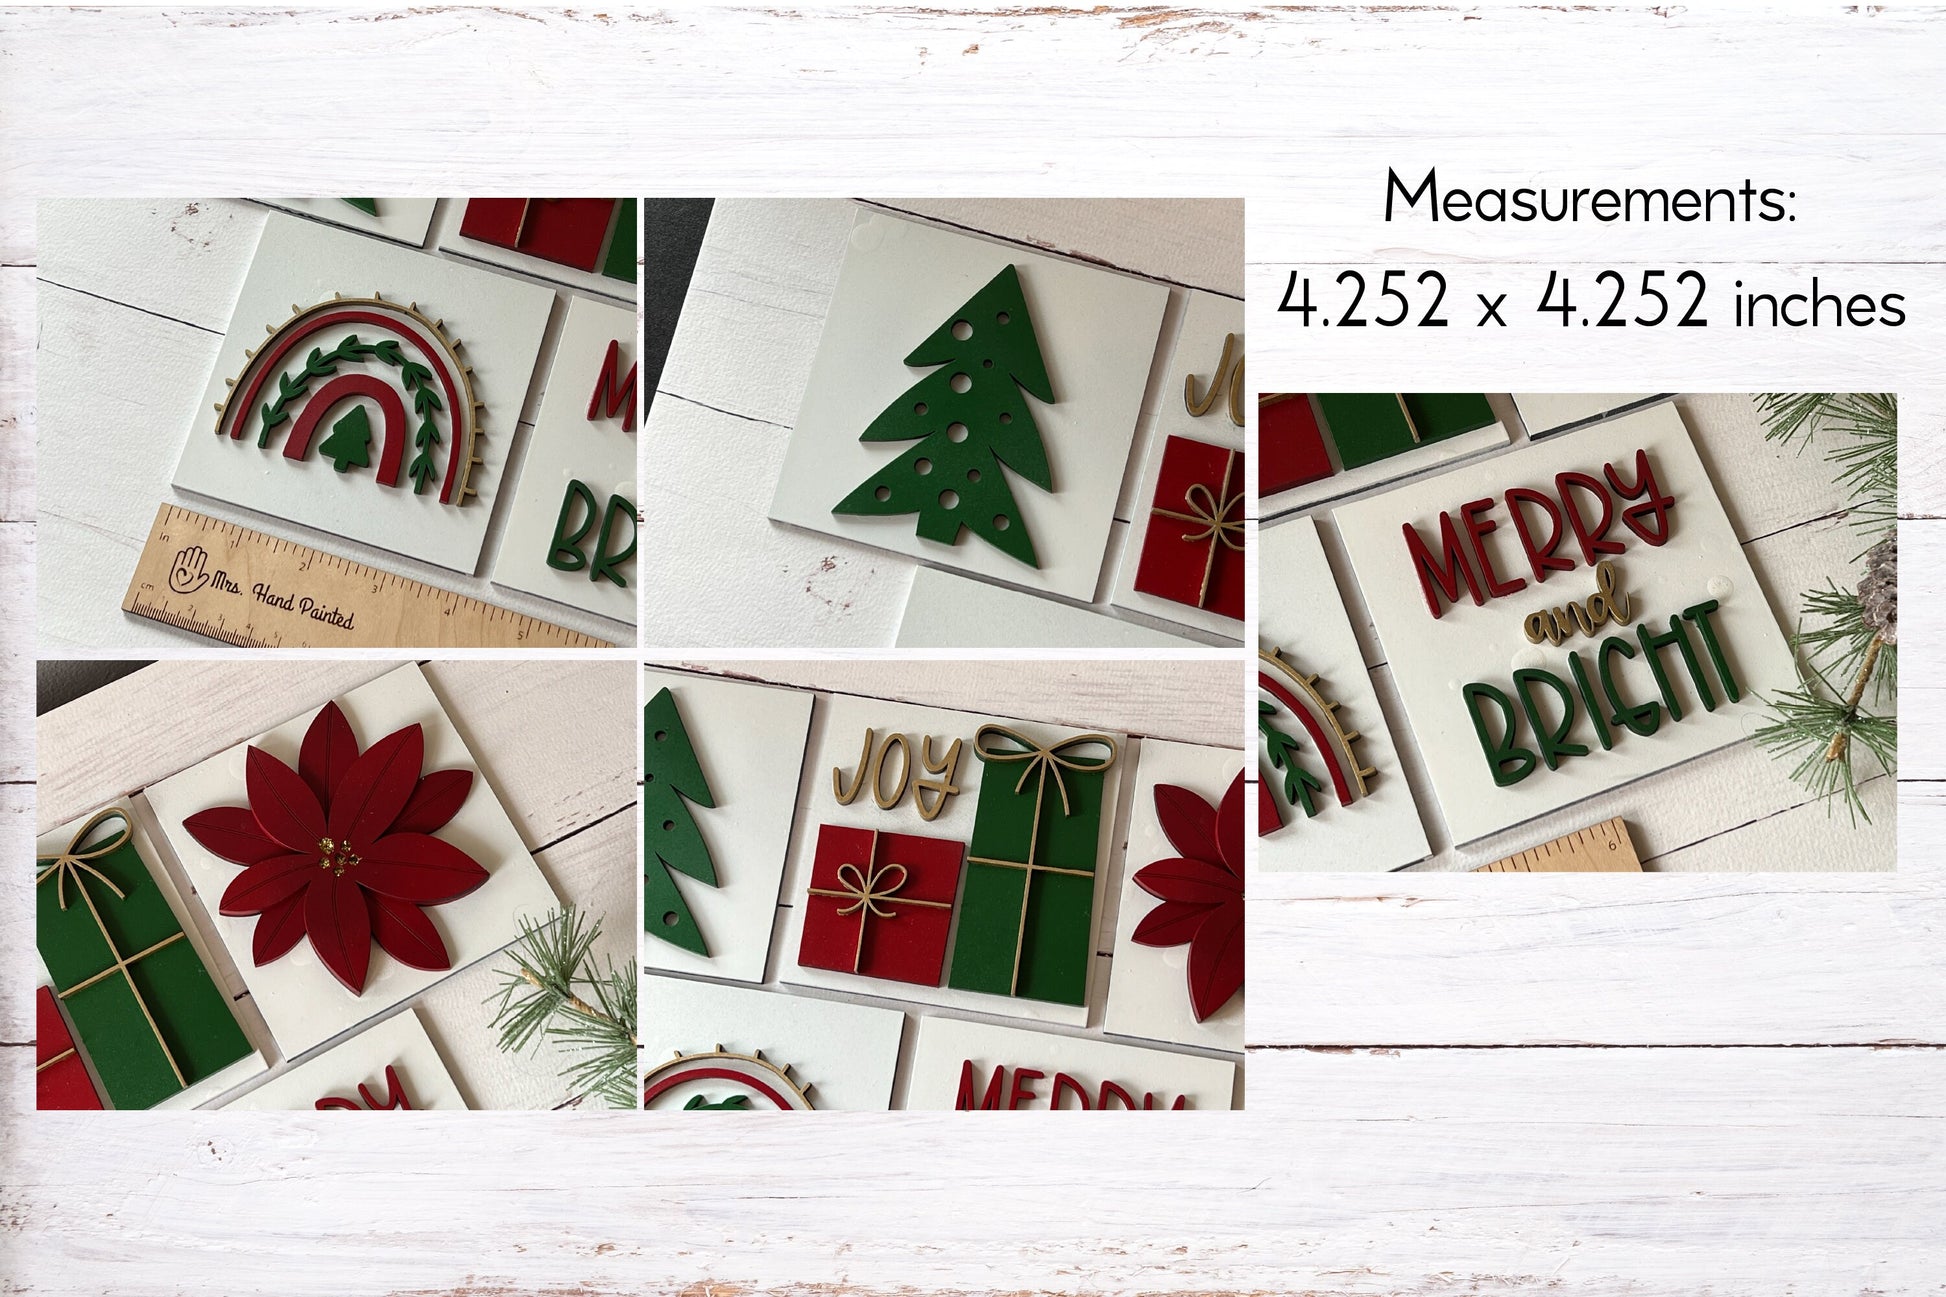 Merry & Bright Boho Christmas Leaning Ladder Interchangeable Signs - Laser Cut Wood Painted